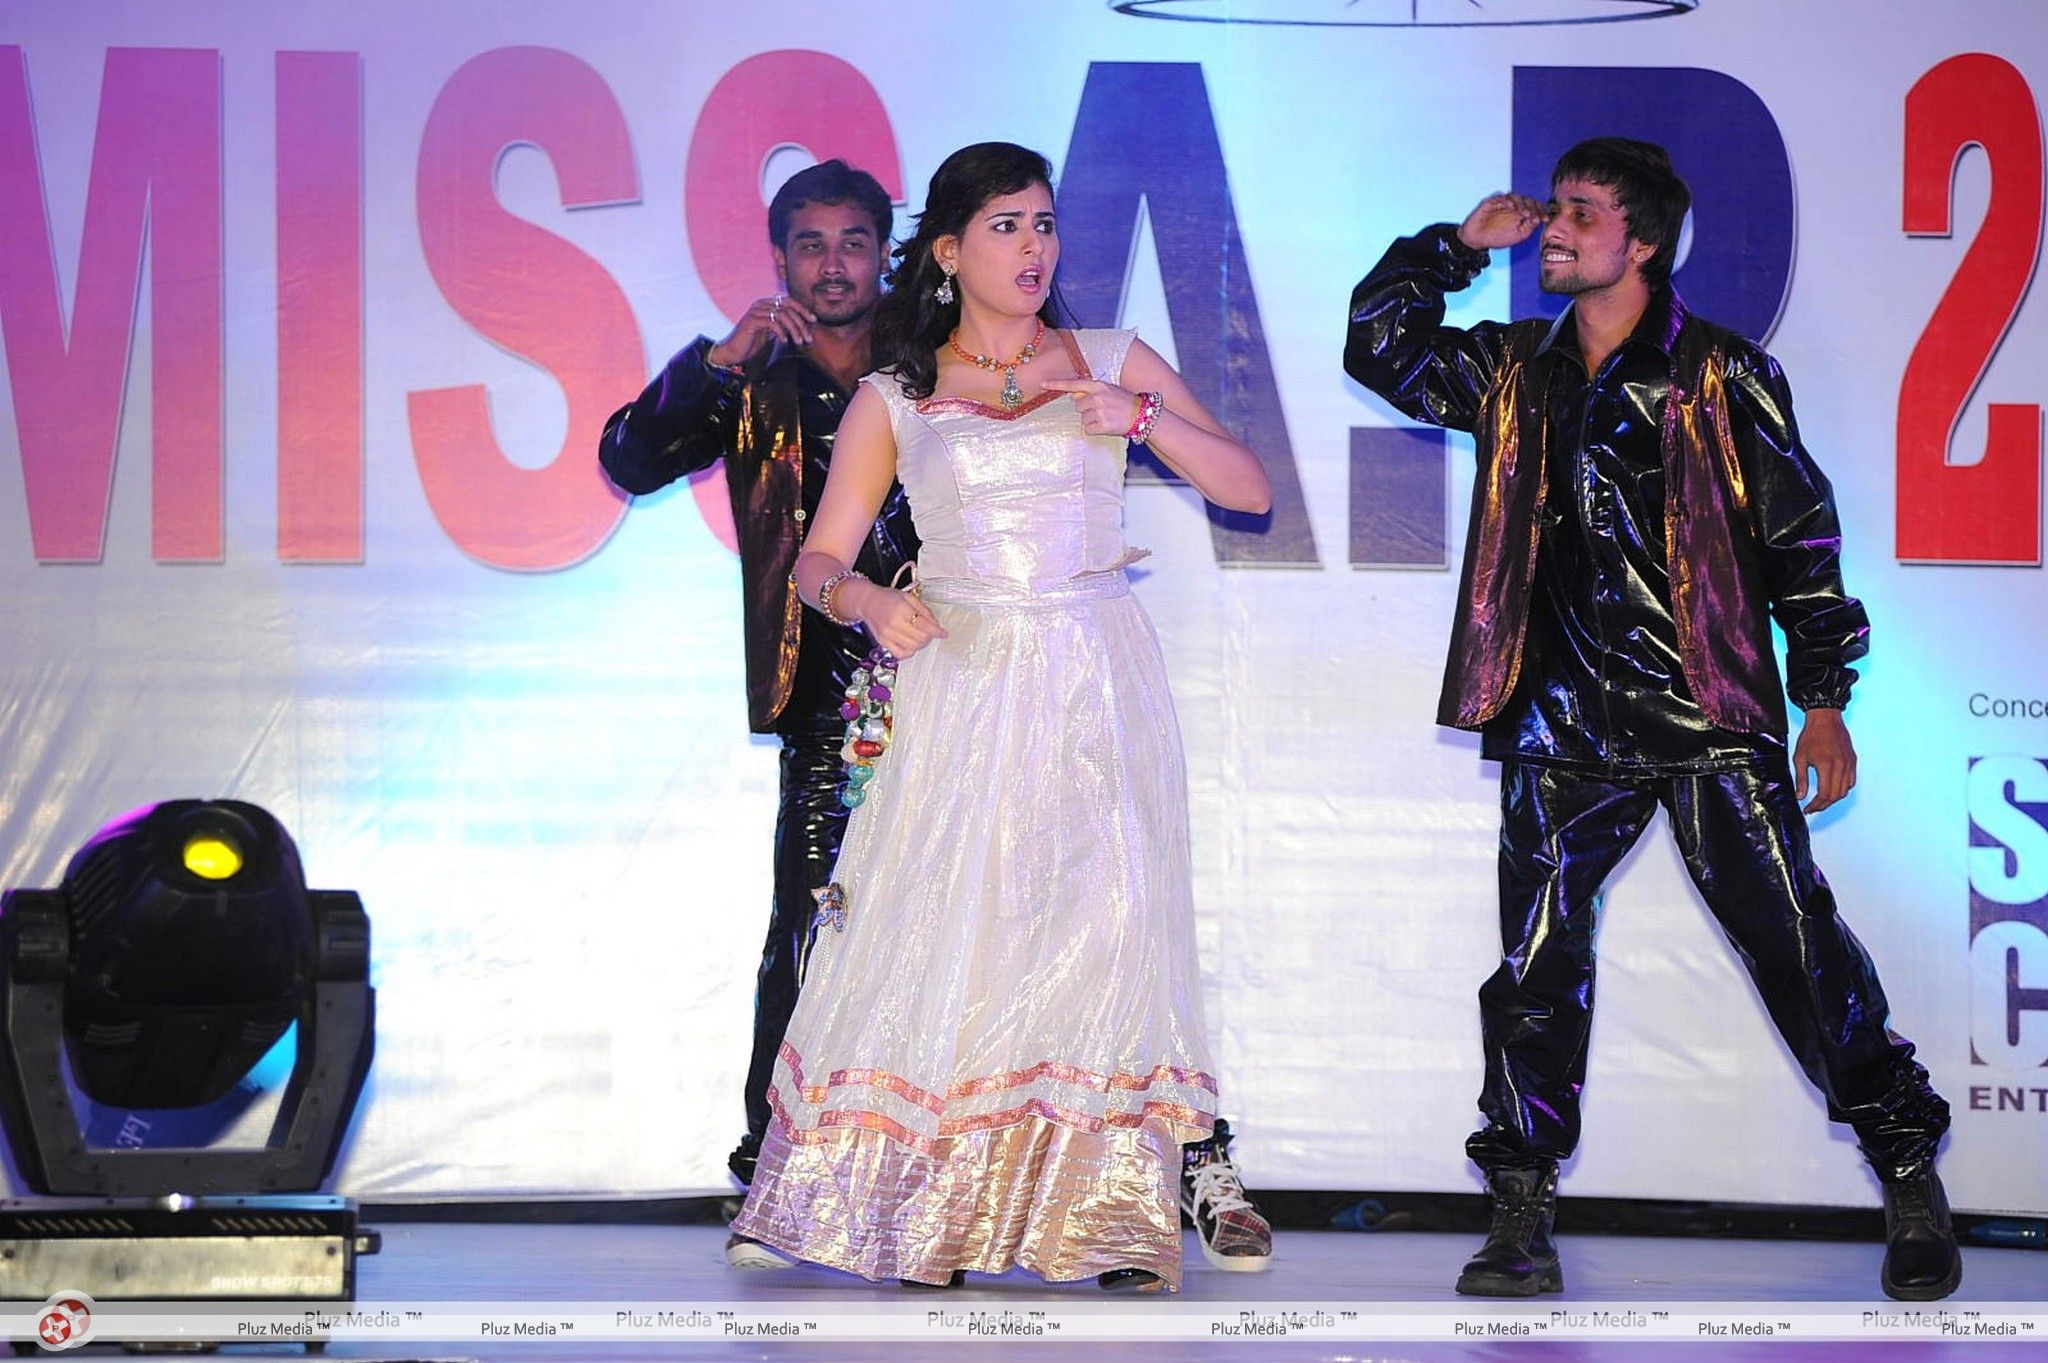 Archana - Tollywood Miss AP 2012 Photos | Picture 348941